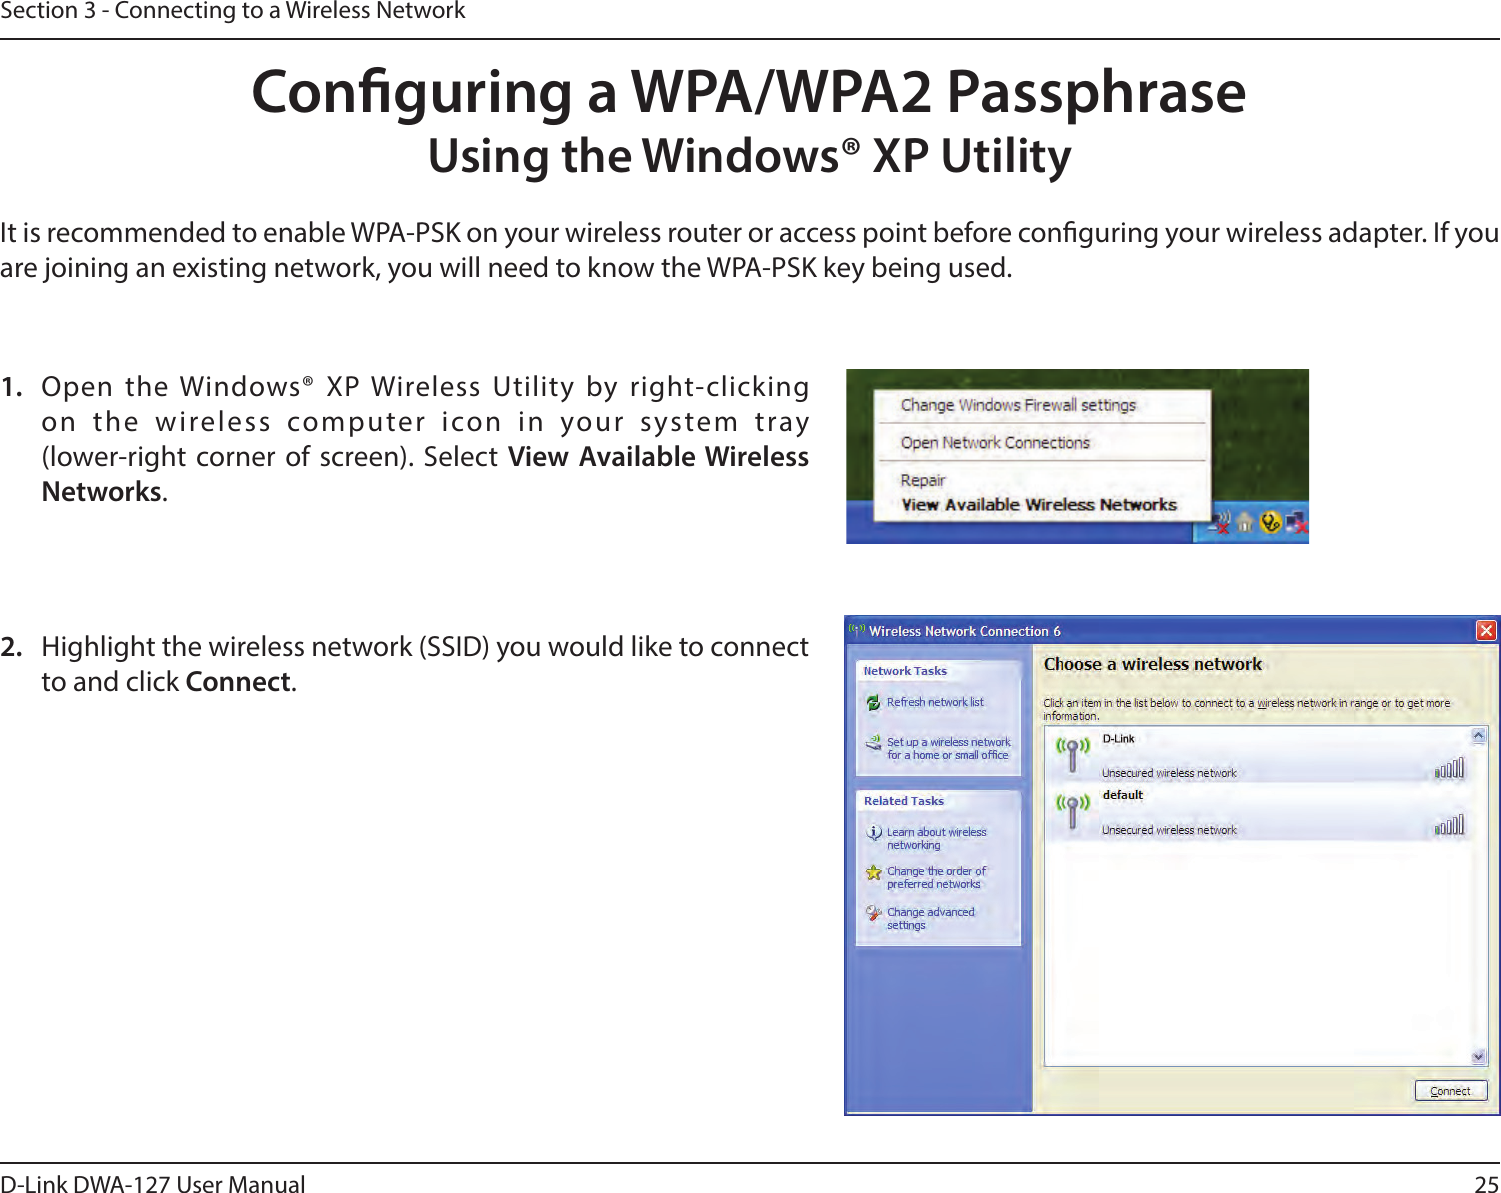 25D-Link DWA-127 User ManualSection 3 - Connecting to a Wireless NetworkConguring a WPA/WPA2 PassphraseUsing the Windows® XP UtilityIt is recommended to enable WPA-PSK on your wireless router or access point before conguring your wireless adapter. If you are joining an existing network, you will need to know the WPA-PSK key being used.2.  Highlight the wireless network (SSID) you would like to connect to and click Connect.1.  Open the Windows® XP Wireless Utility by right-clicking on the wireless computer icon in your system tray  (lower-right corner of screen). Select View Available Wireless Networks. 